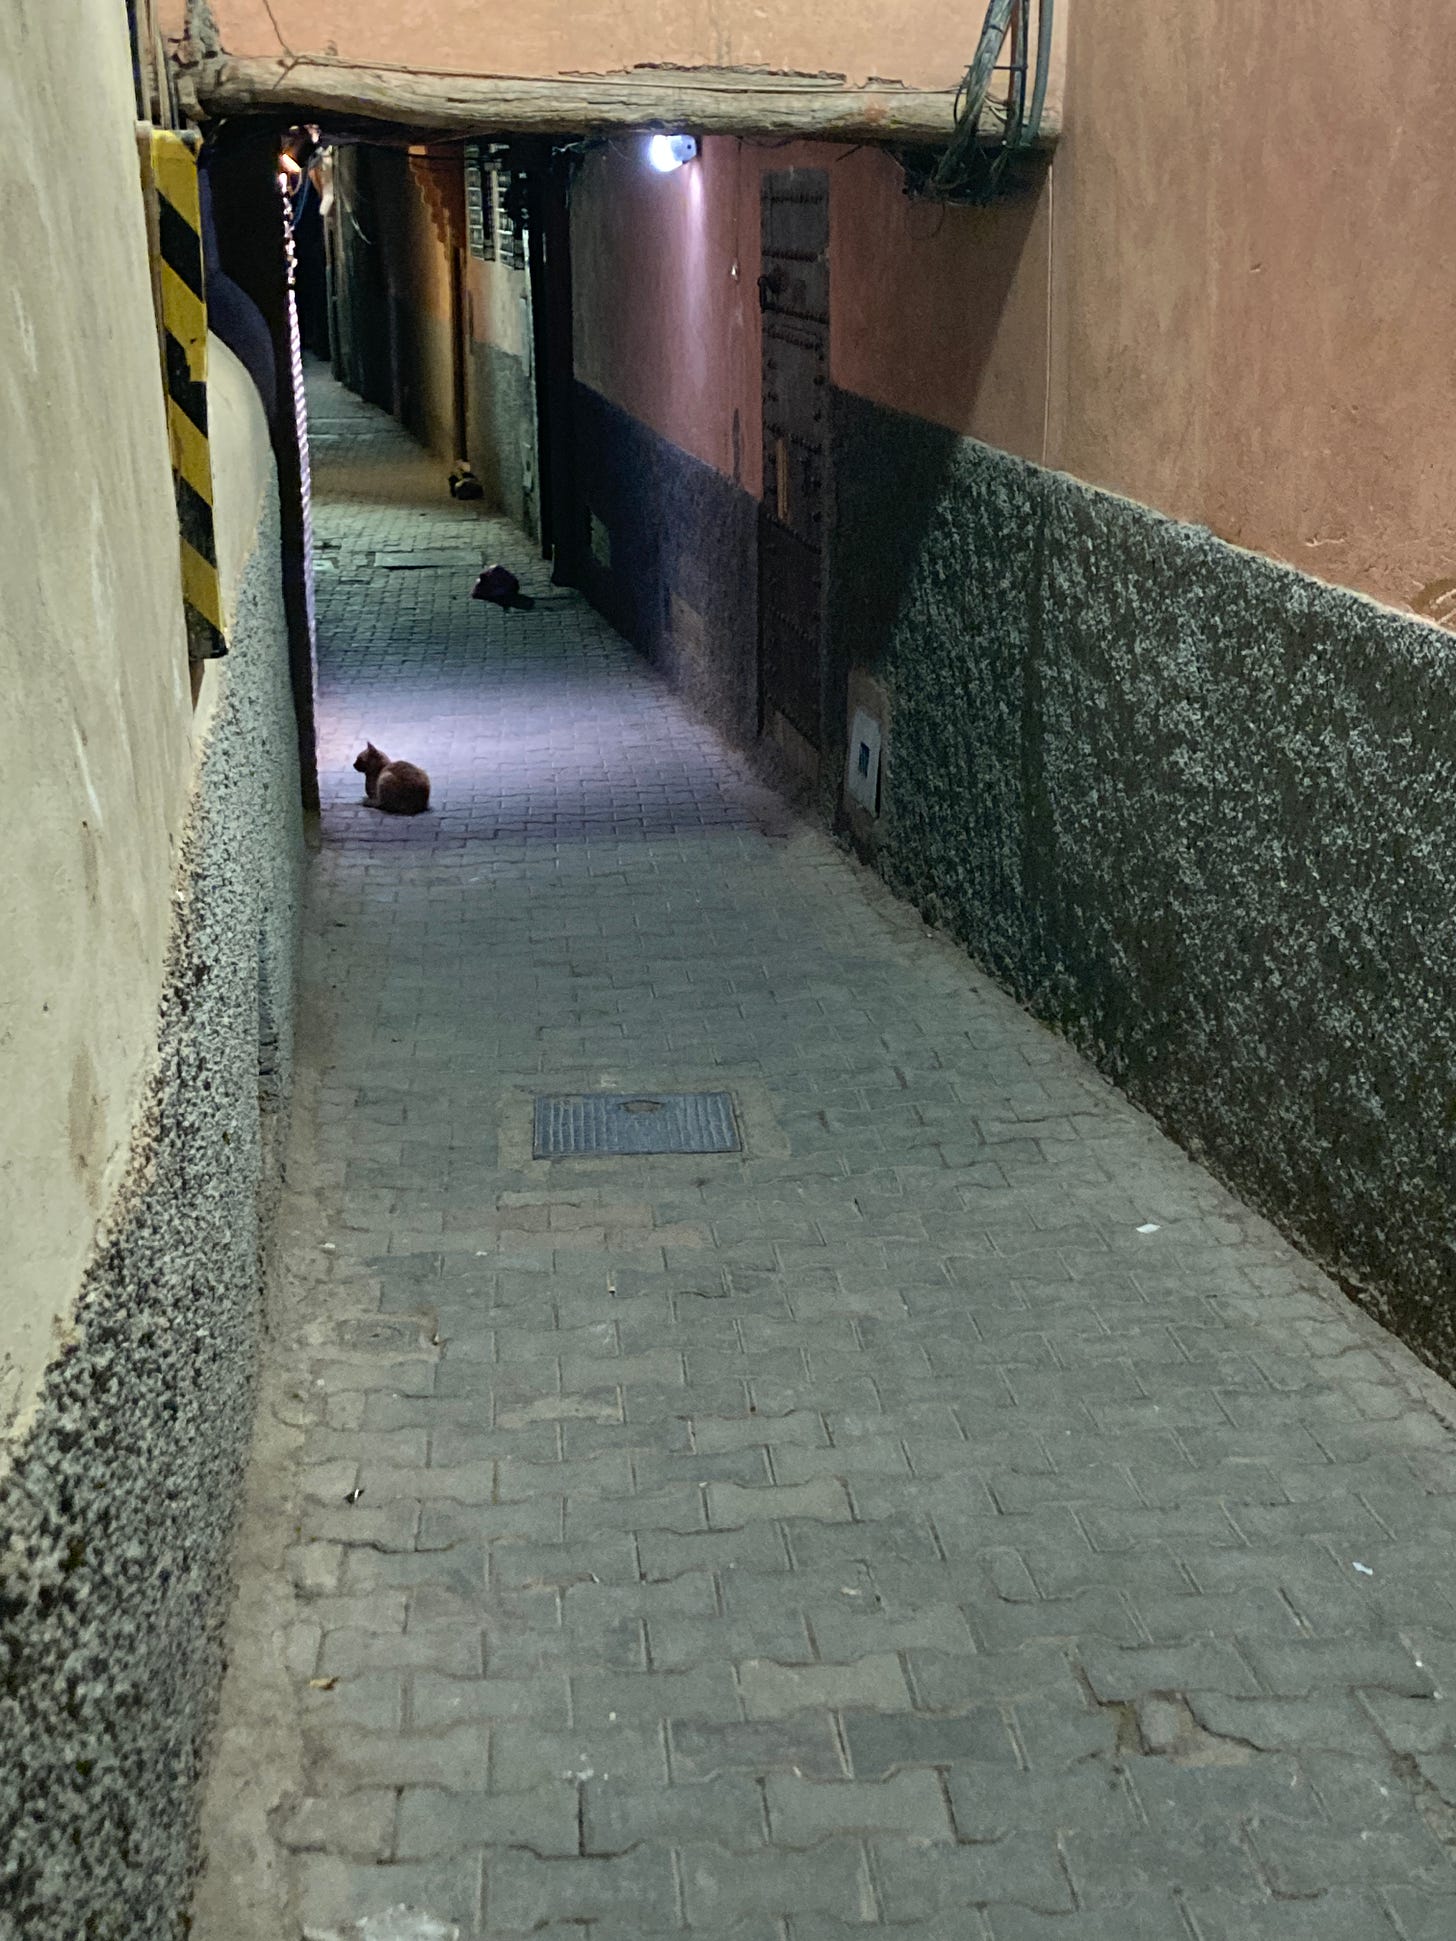 A darkened alleyway with cats sitting at intervals.